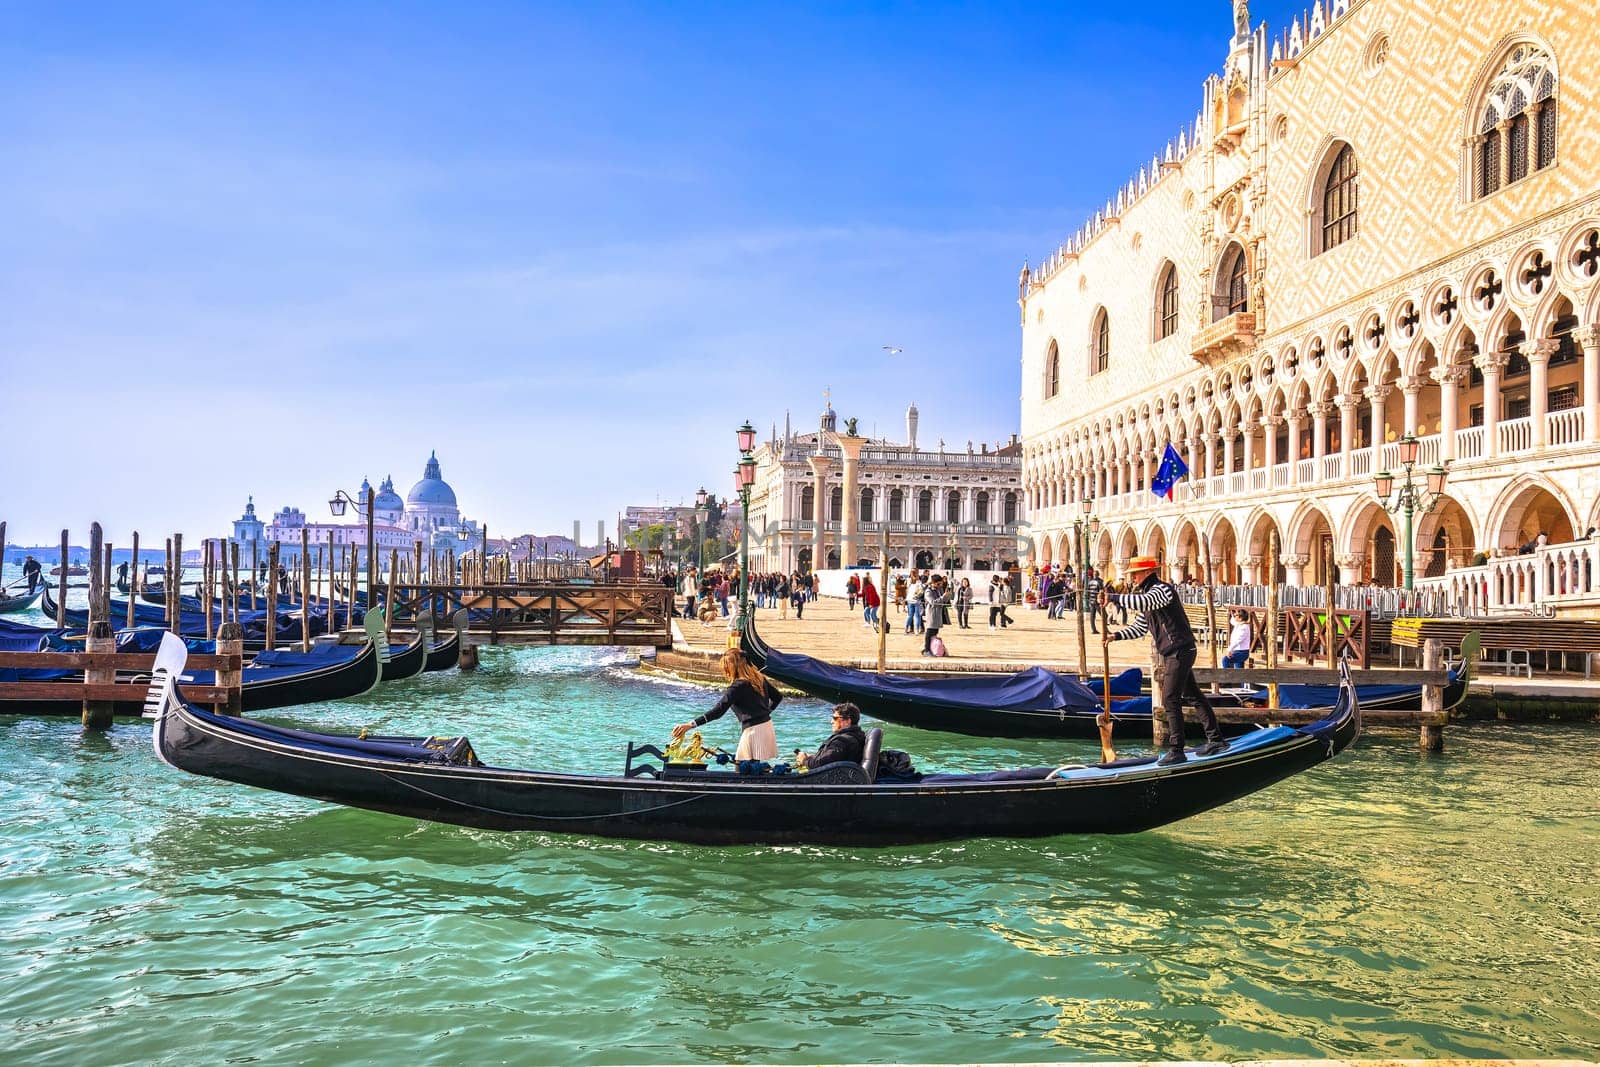 Duke palace waterfront in Venice gondolas on Valentines day view by xbrchx